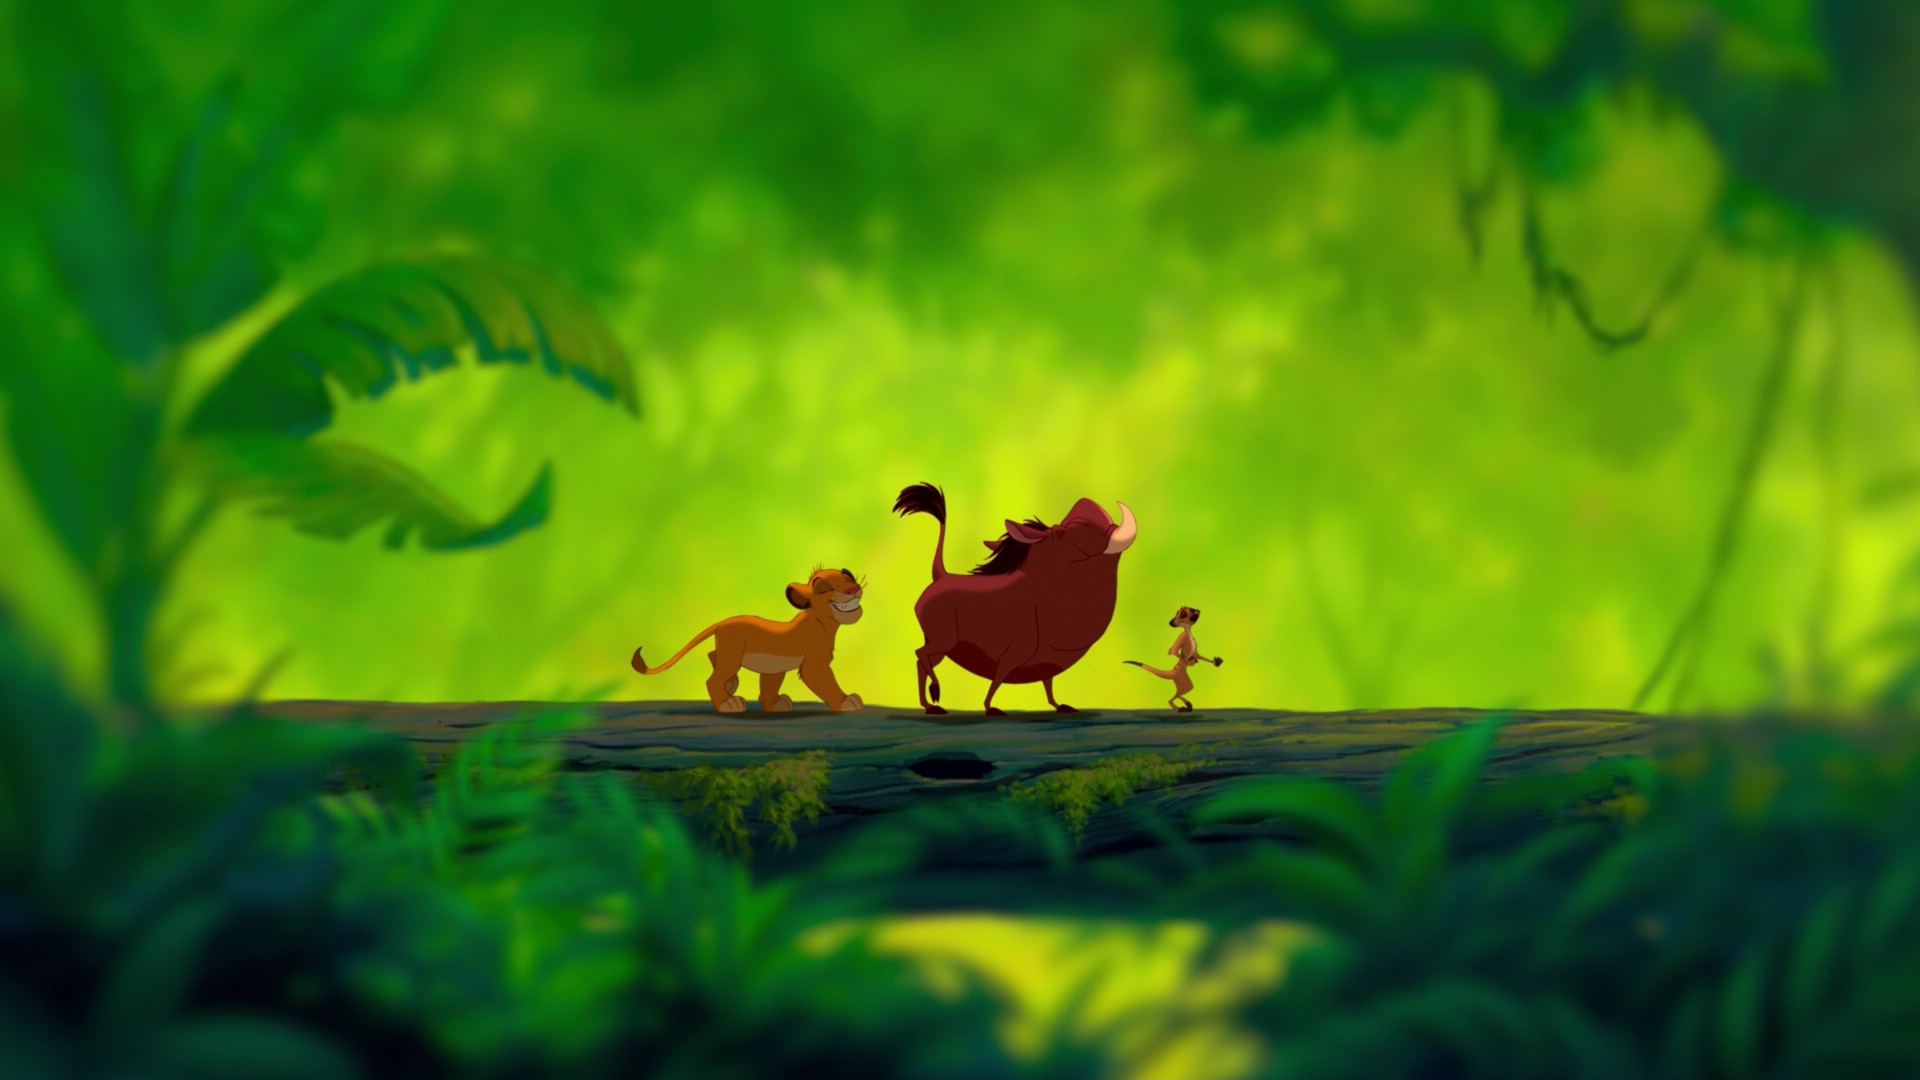 Hd 4k Background Wallpapers Of Lion King